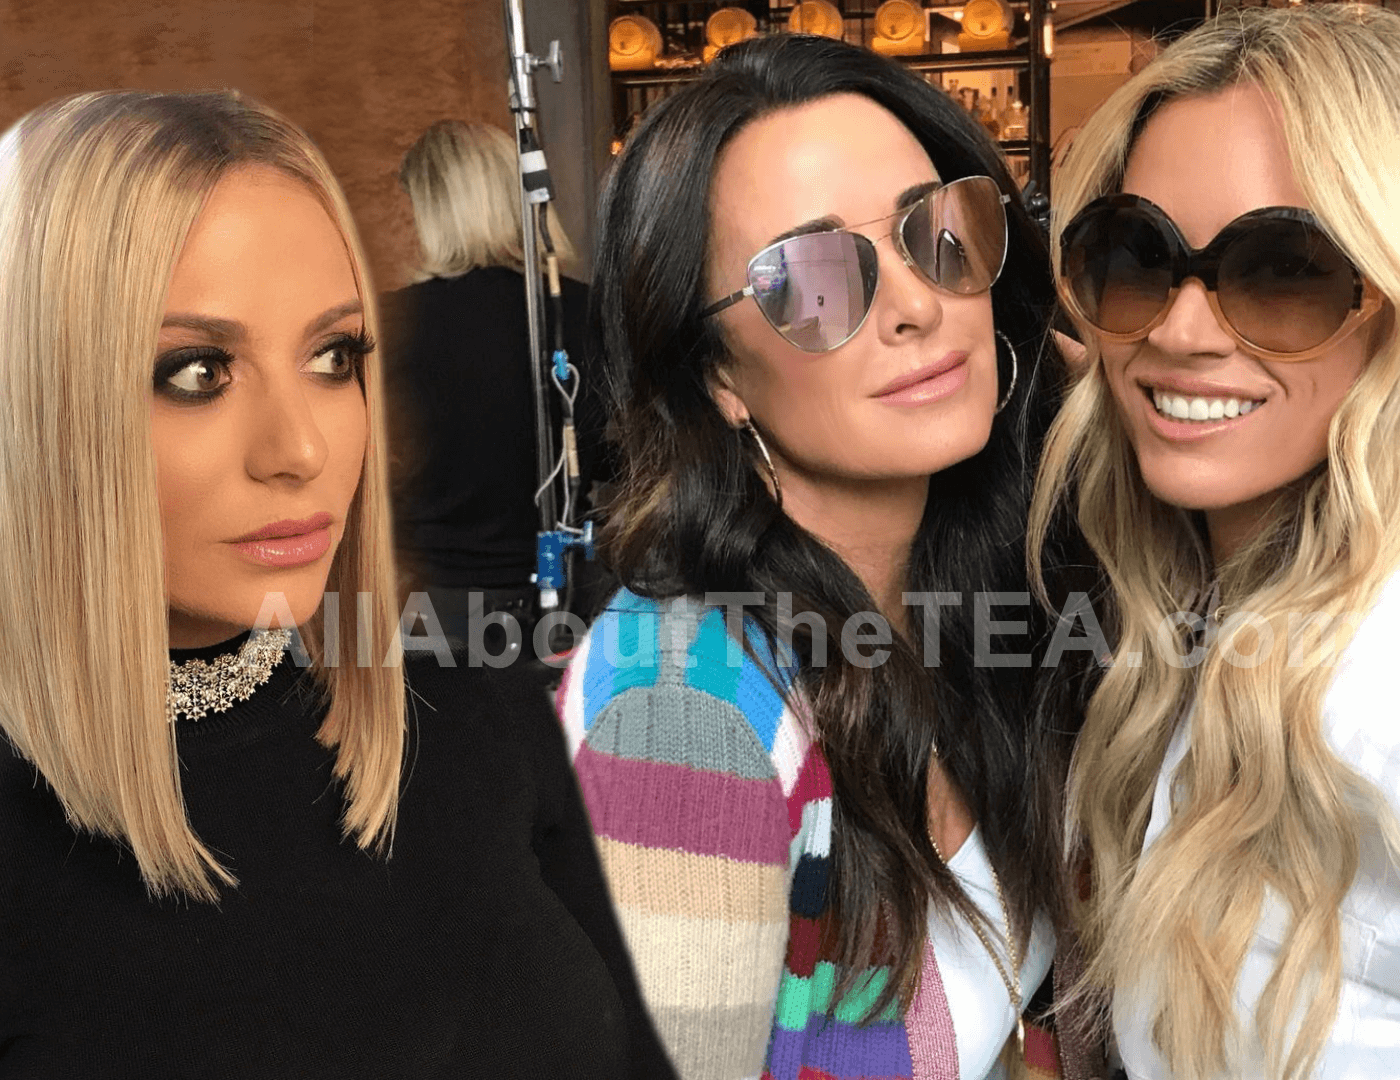 Dorit Kemsley ‘Annoyed’ With Kyle Richards & Teddi Mellencamp’s Friendship and Questions Their Loyalty!